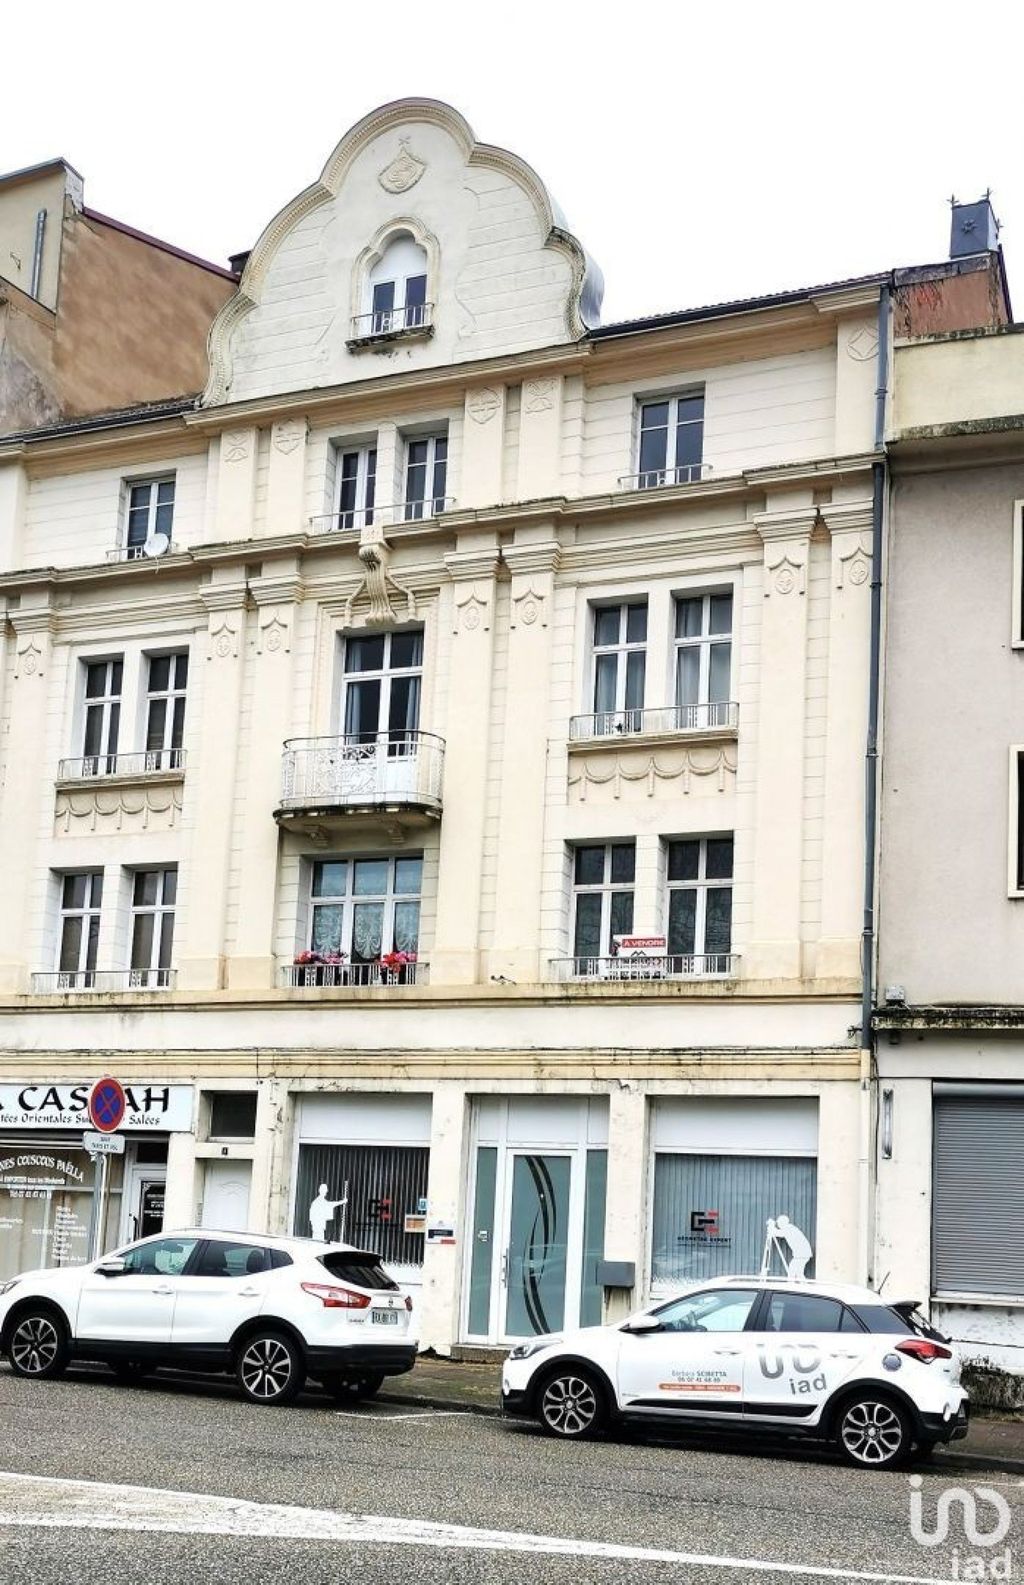 Achat appartement 4 pièce(s) Freyming-Merlebach